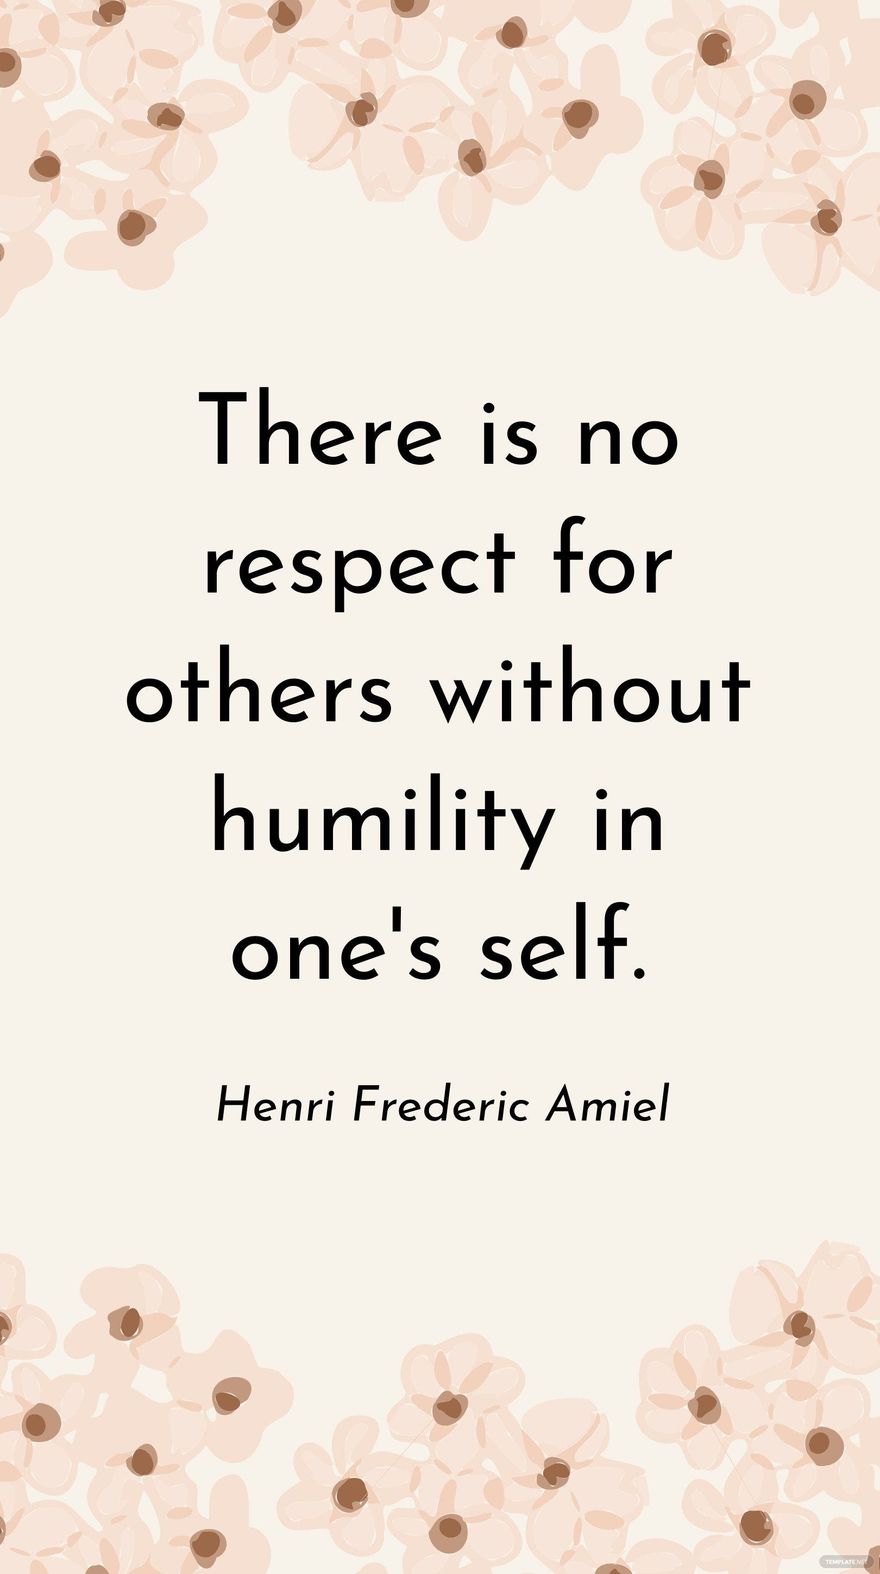 Free Henri Frederic Amiel - There is no respect for others without humility in one's self. in JPG